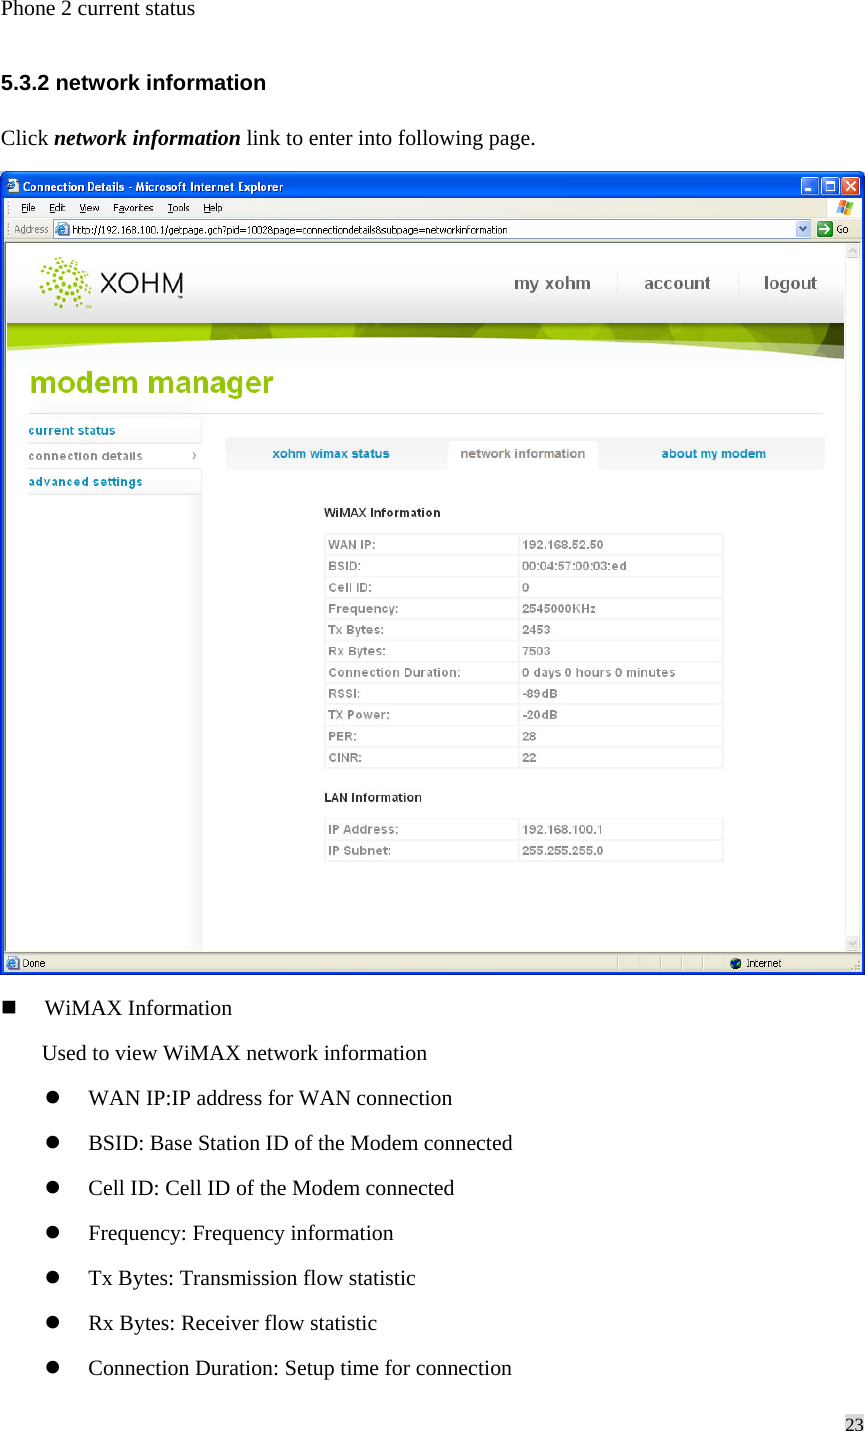 23  Phone 2 current status 5.3.2 network information Click network information link to enter into following page.    WiMAX Information Used to view WiMAX network information   WAN IP:IP address for WAN connection   BSID: Base Station ID of the Modem connected   Cell ID: Cell ID of the Modem connected   Frequency: Frequency information   Tx Bytes: Transmission flow statistic   Rx Bytes: Receiver flow statistic   Connection Duration: Setup time for connection 